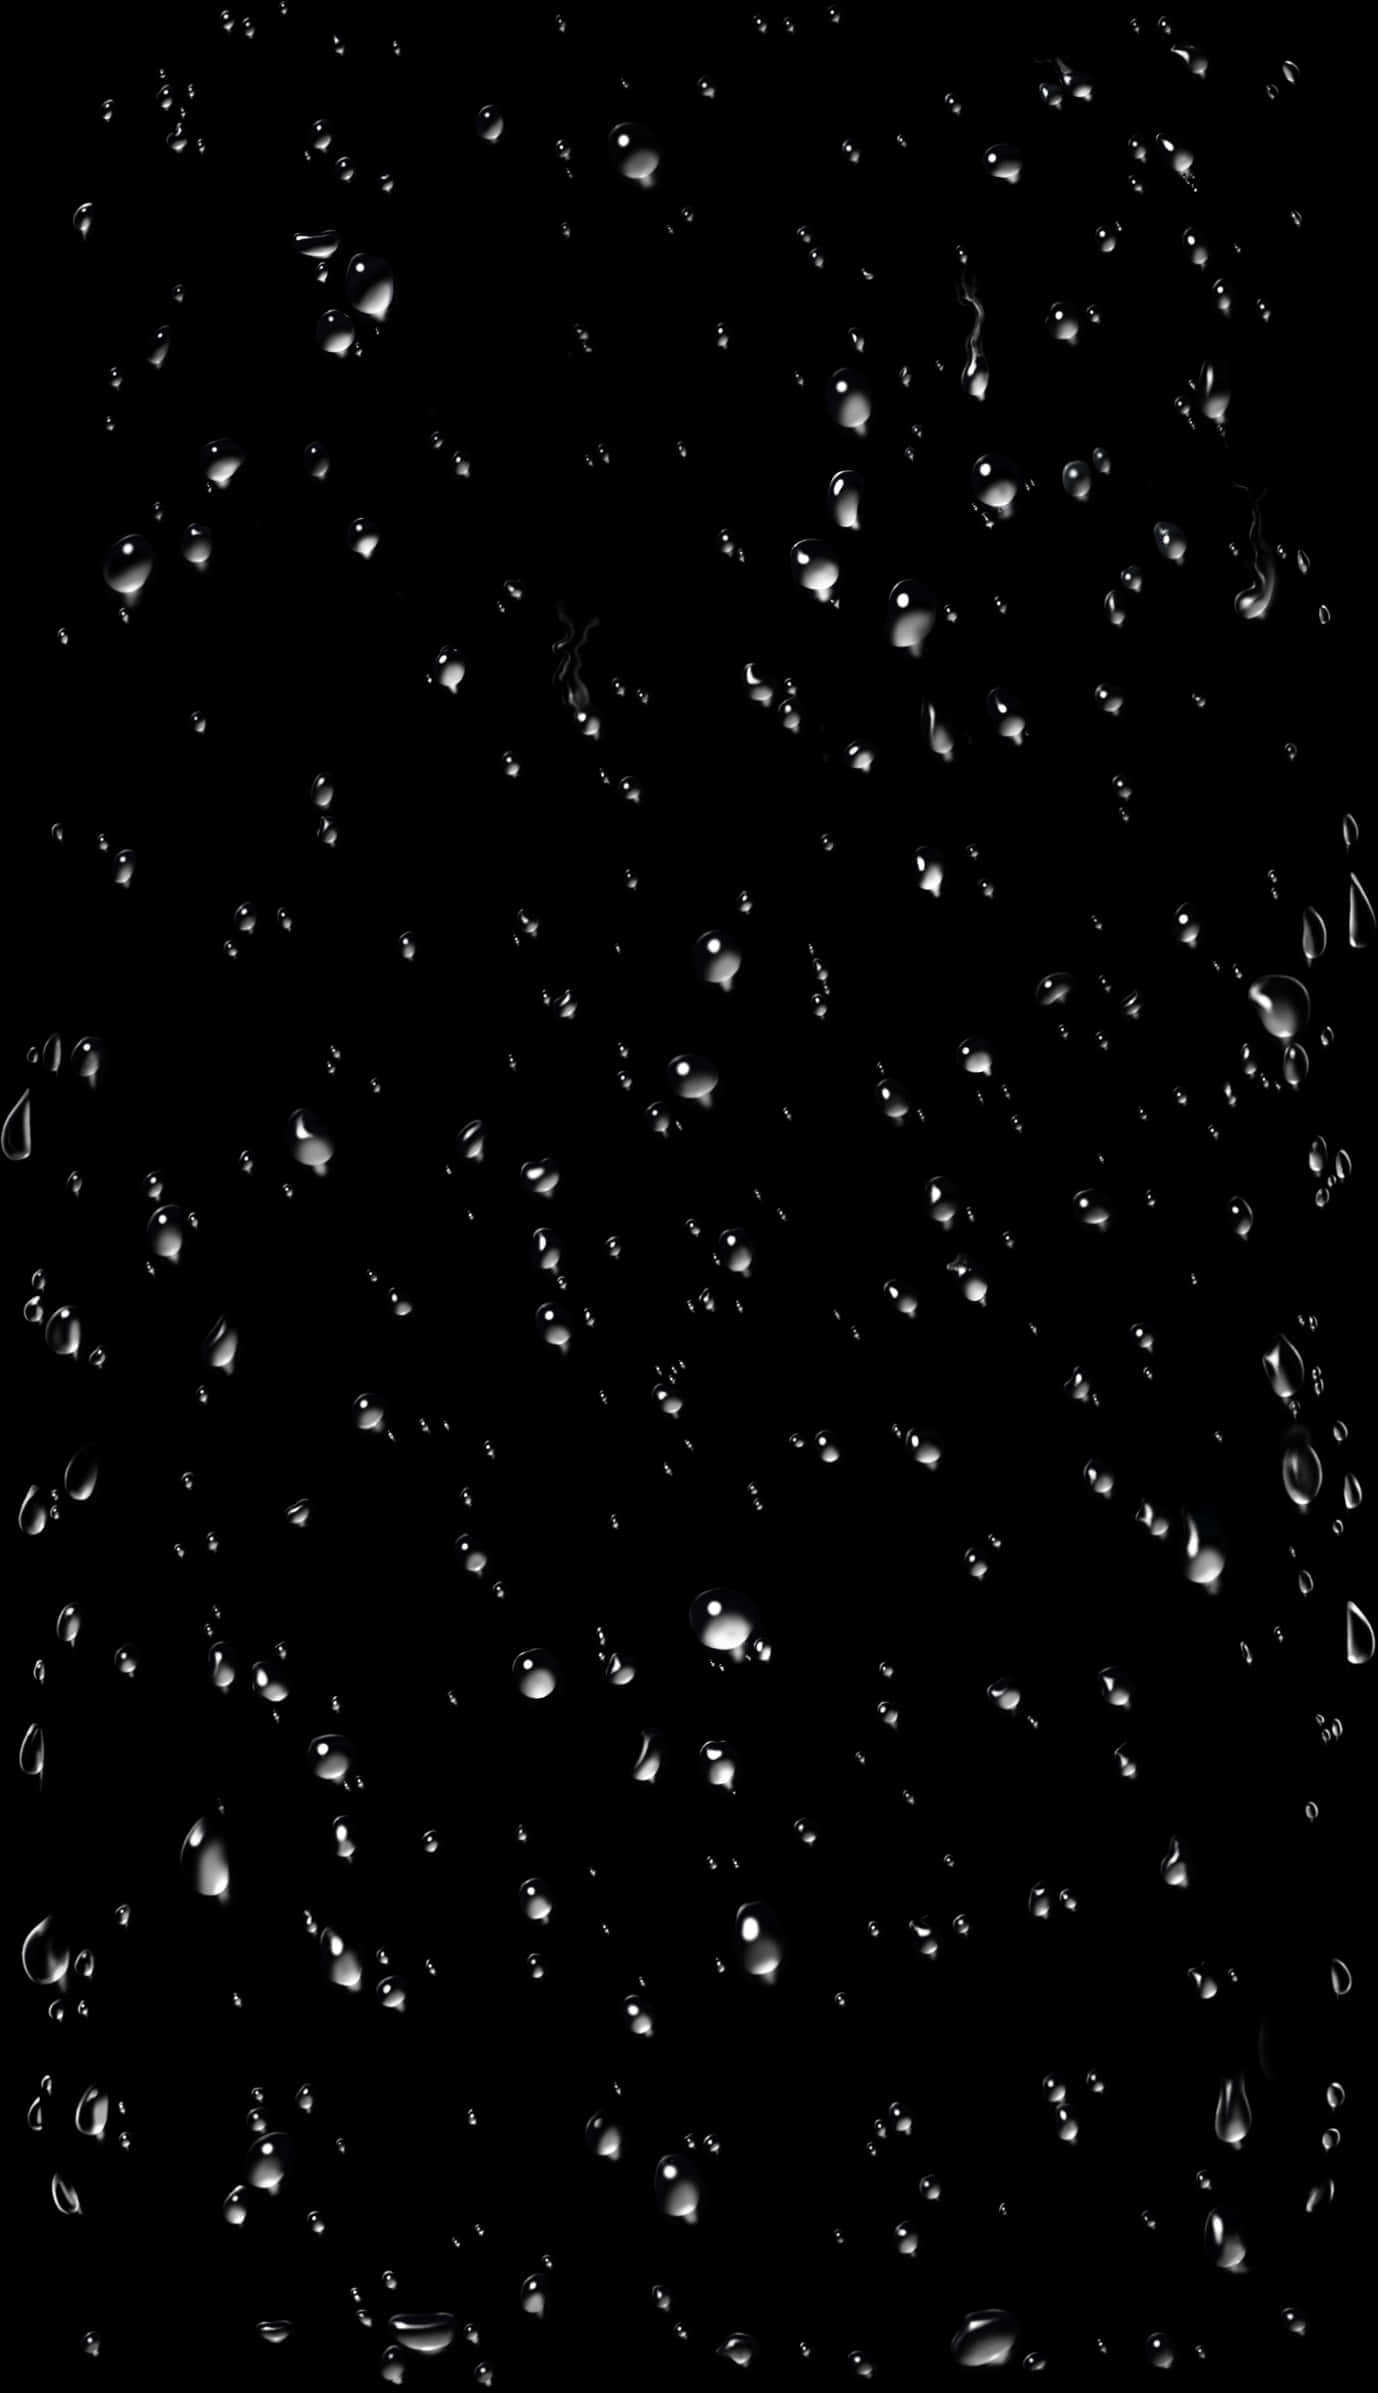 Water Drops On A Black Background